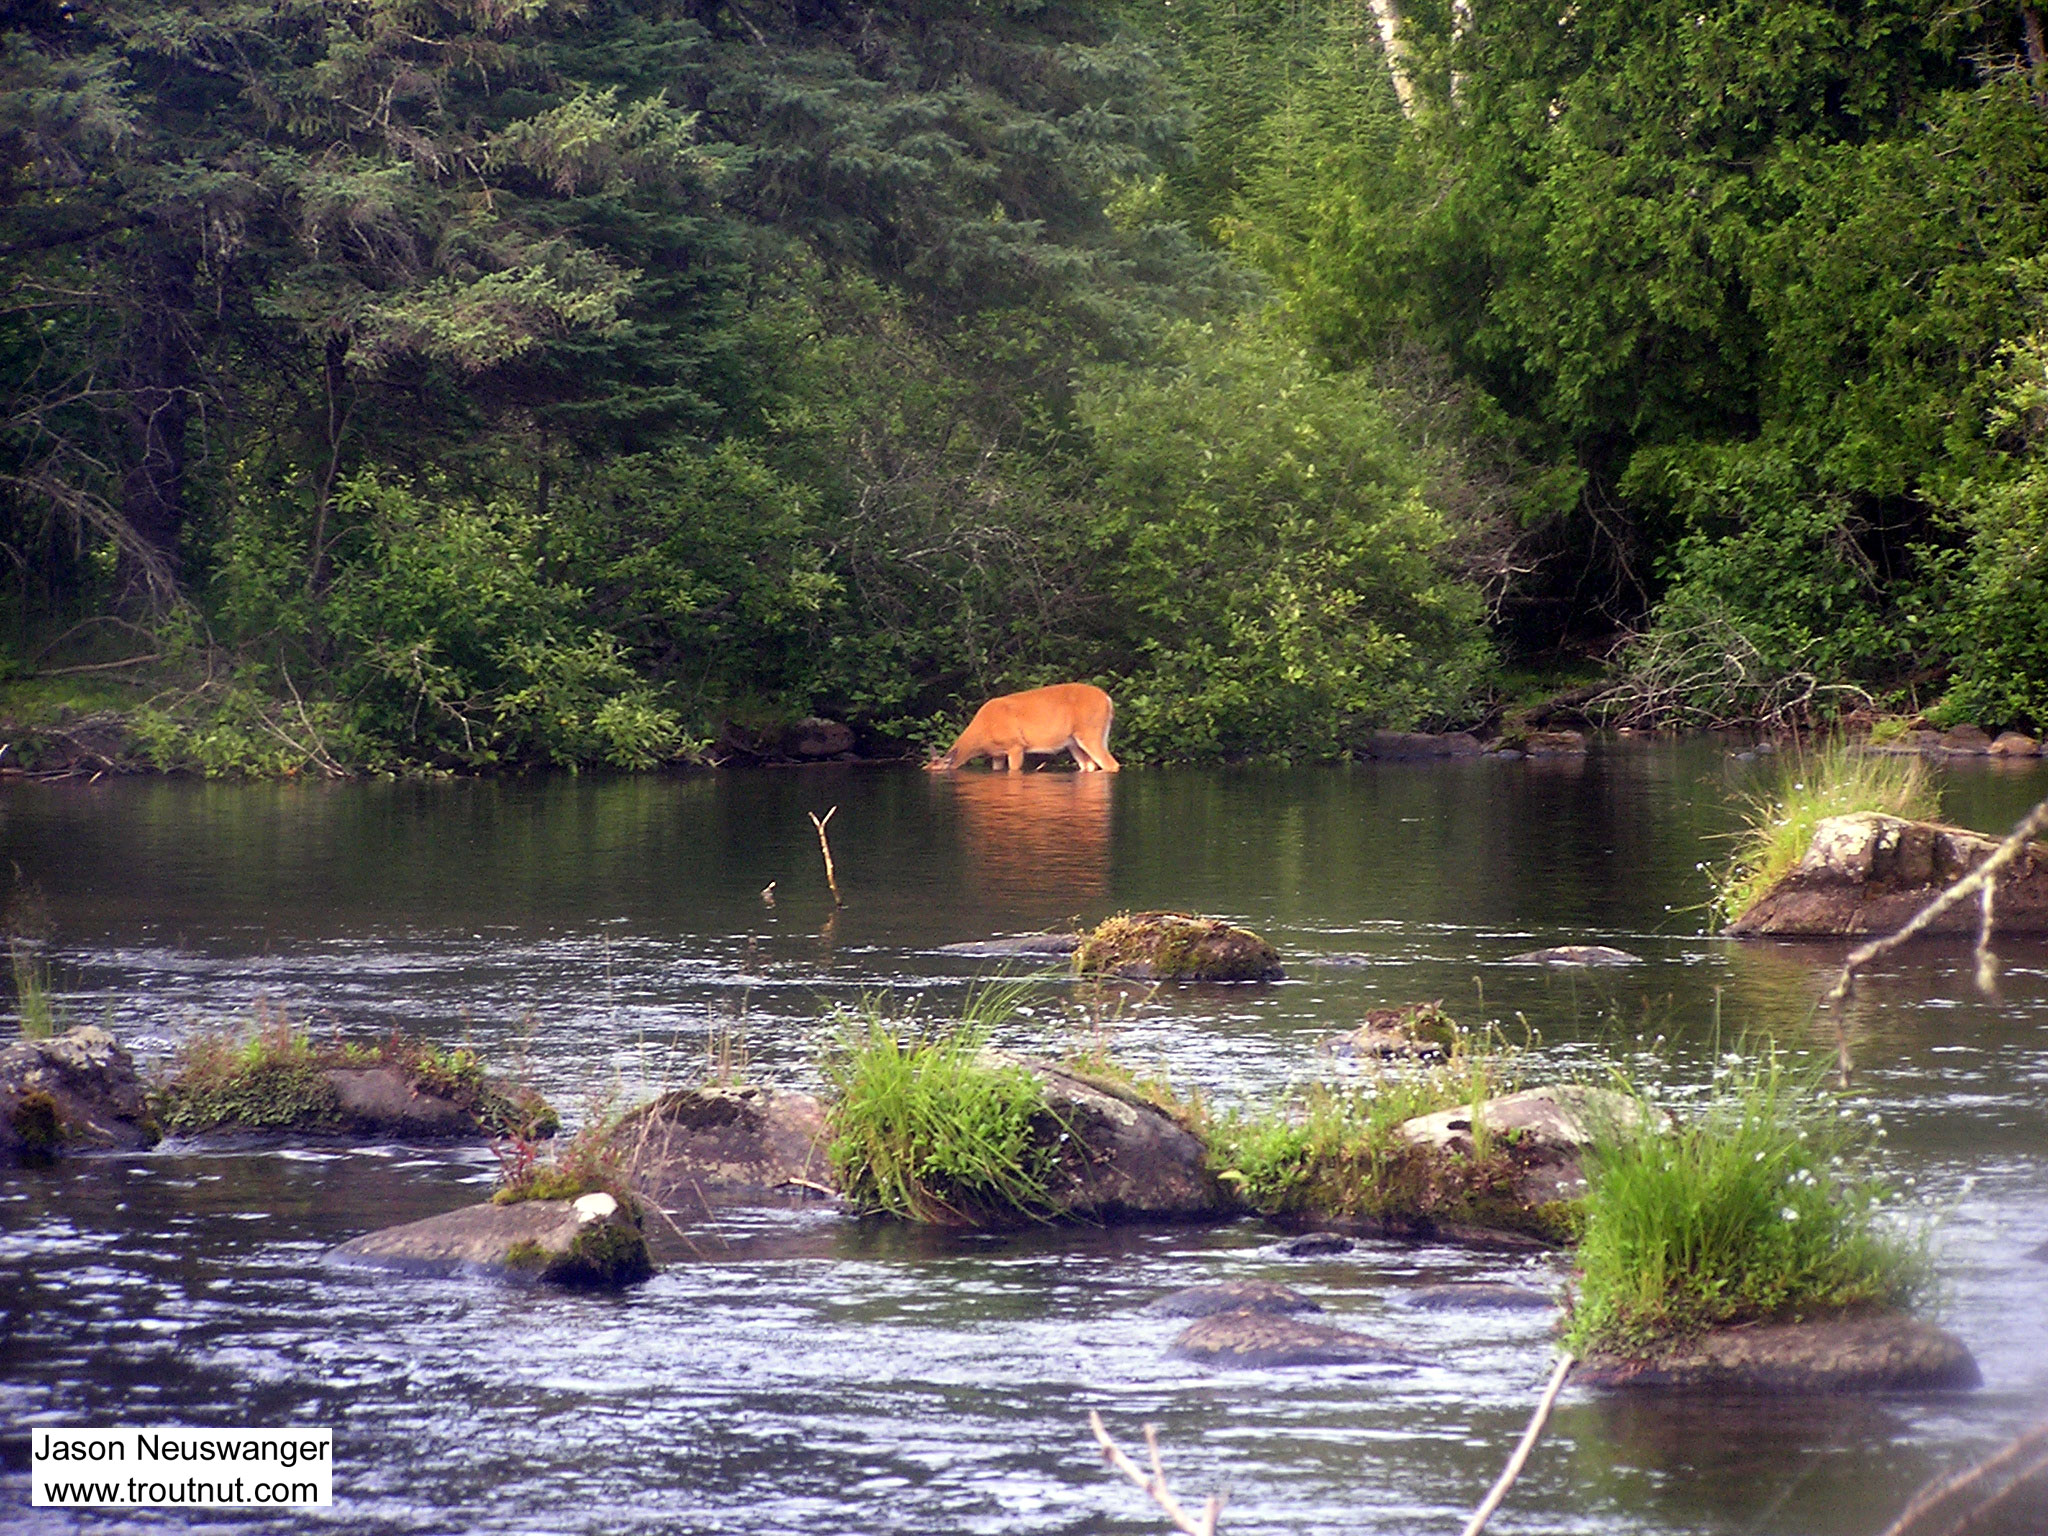 A whitetail deer pretends to be a moose, sticking its head underwater to graze on rich aquatic vegetation. From the Bois Brule River in Wisconsin.